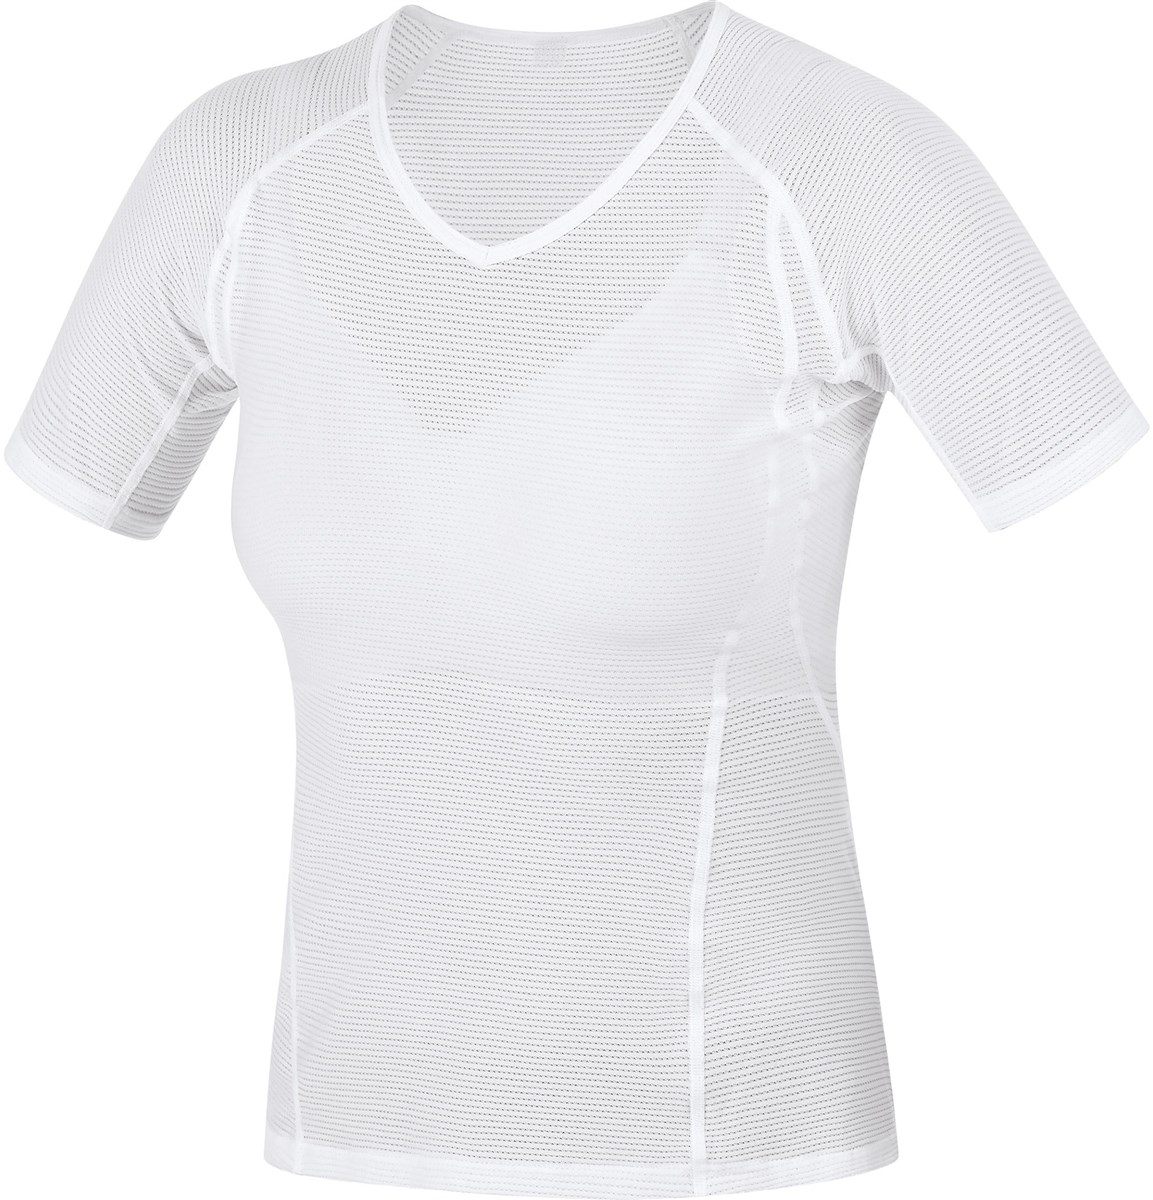 Gore Womens Short Sleeve Base Layer AW17